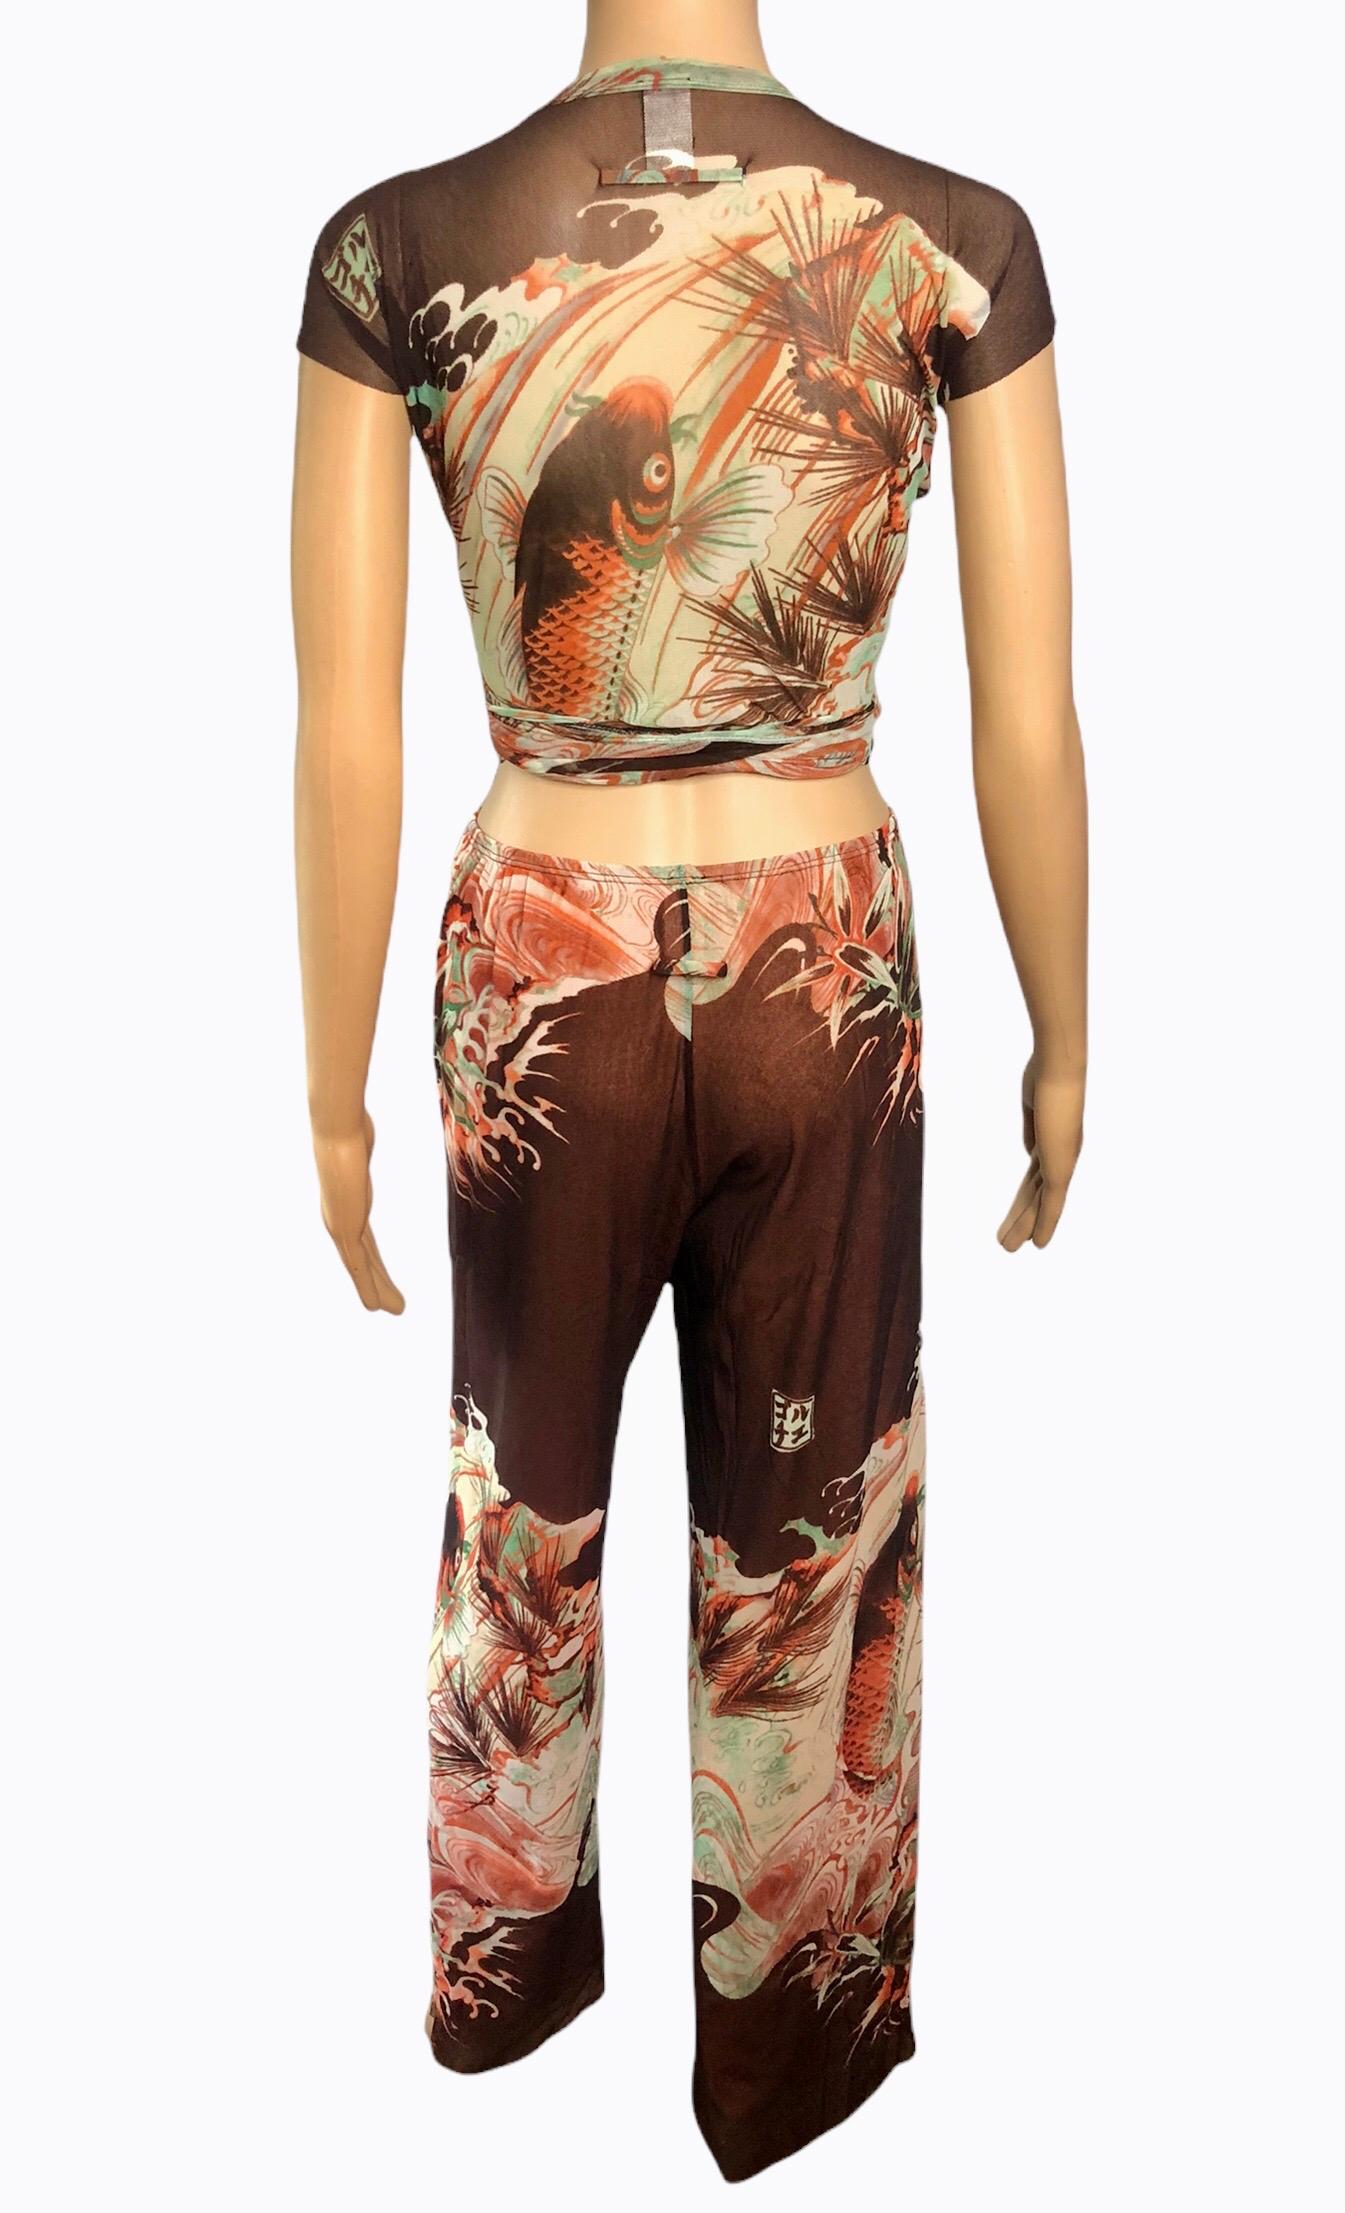 Jean Paul Gaultier Soleil Vintage Koi Fish Tattoo Print Top & Pants 2 Piece Set In Good Condition For Sale In Naples, FL